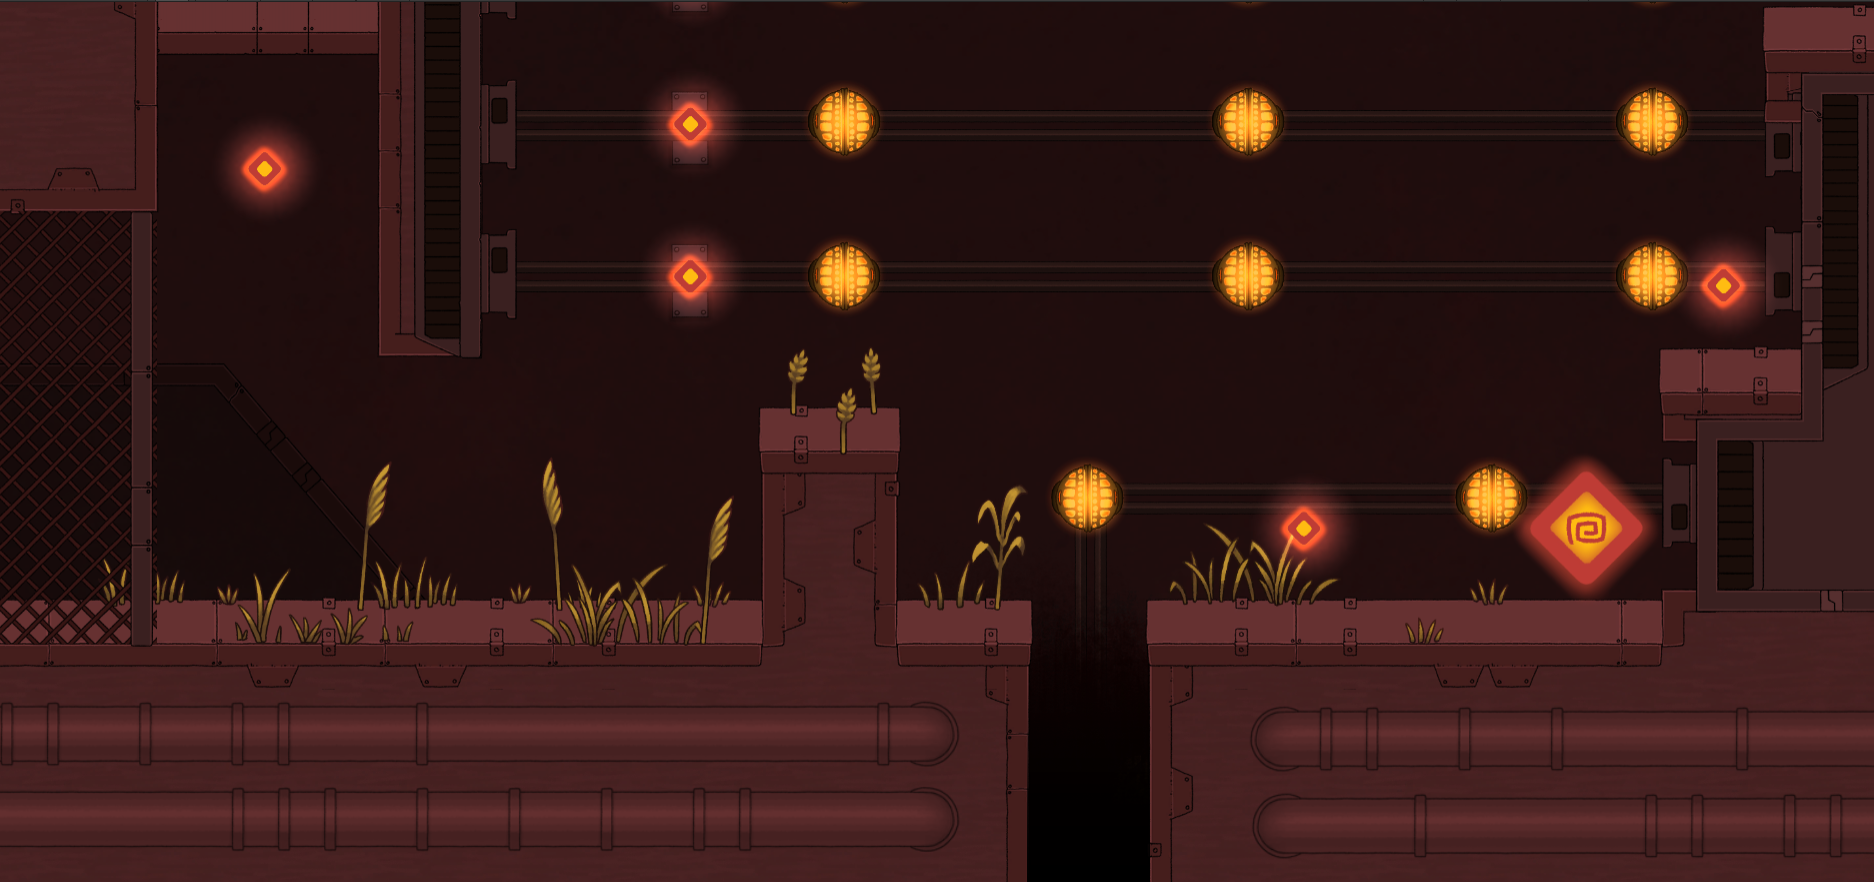 Grass in the red environment level screenshot